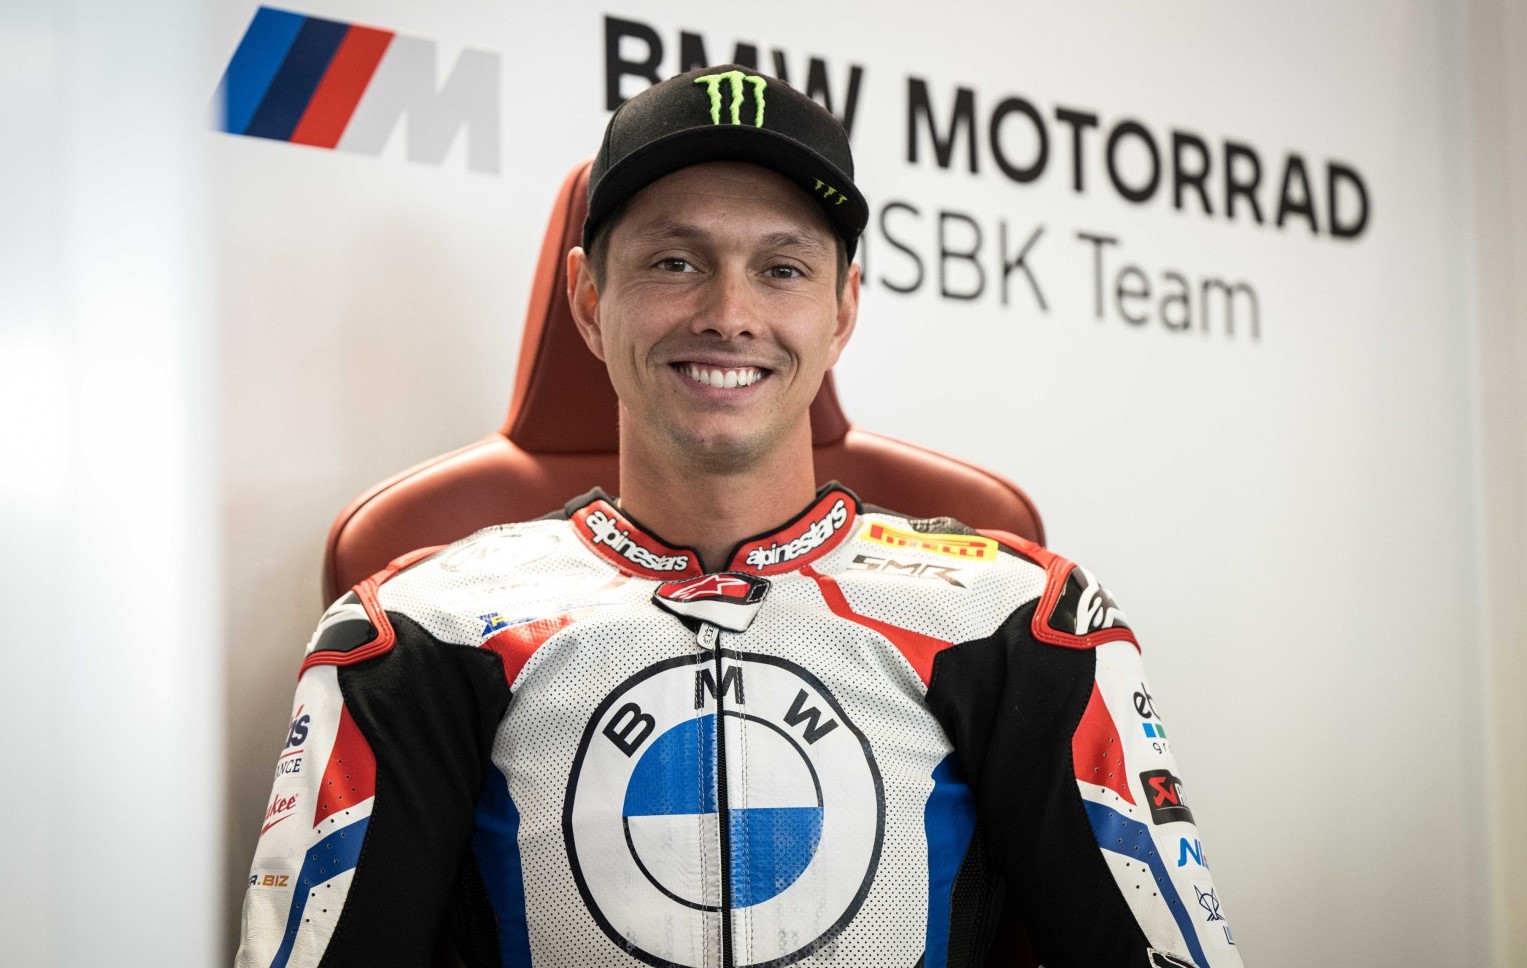 Michael Van Der Mark extends contract with BMW for 2023